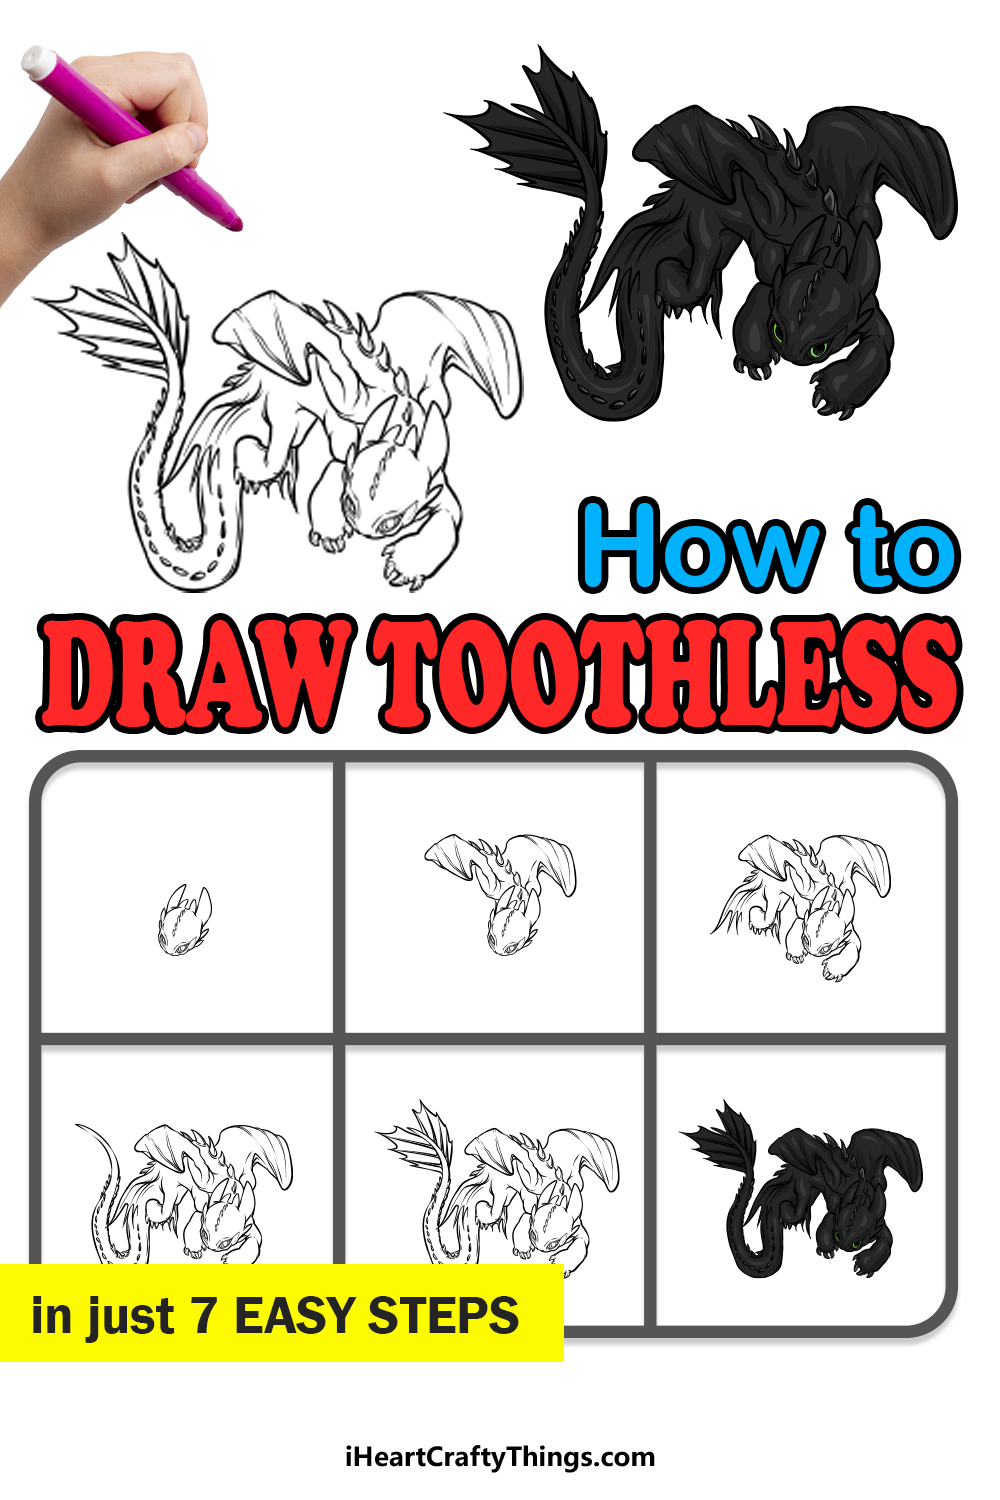 how to draw Toothless in 7 easy steps